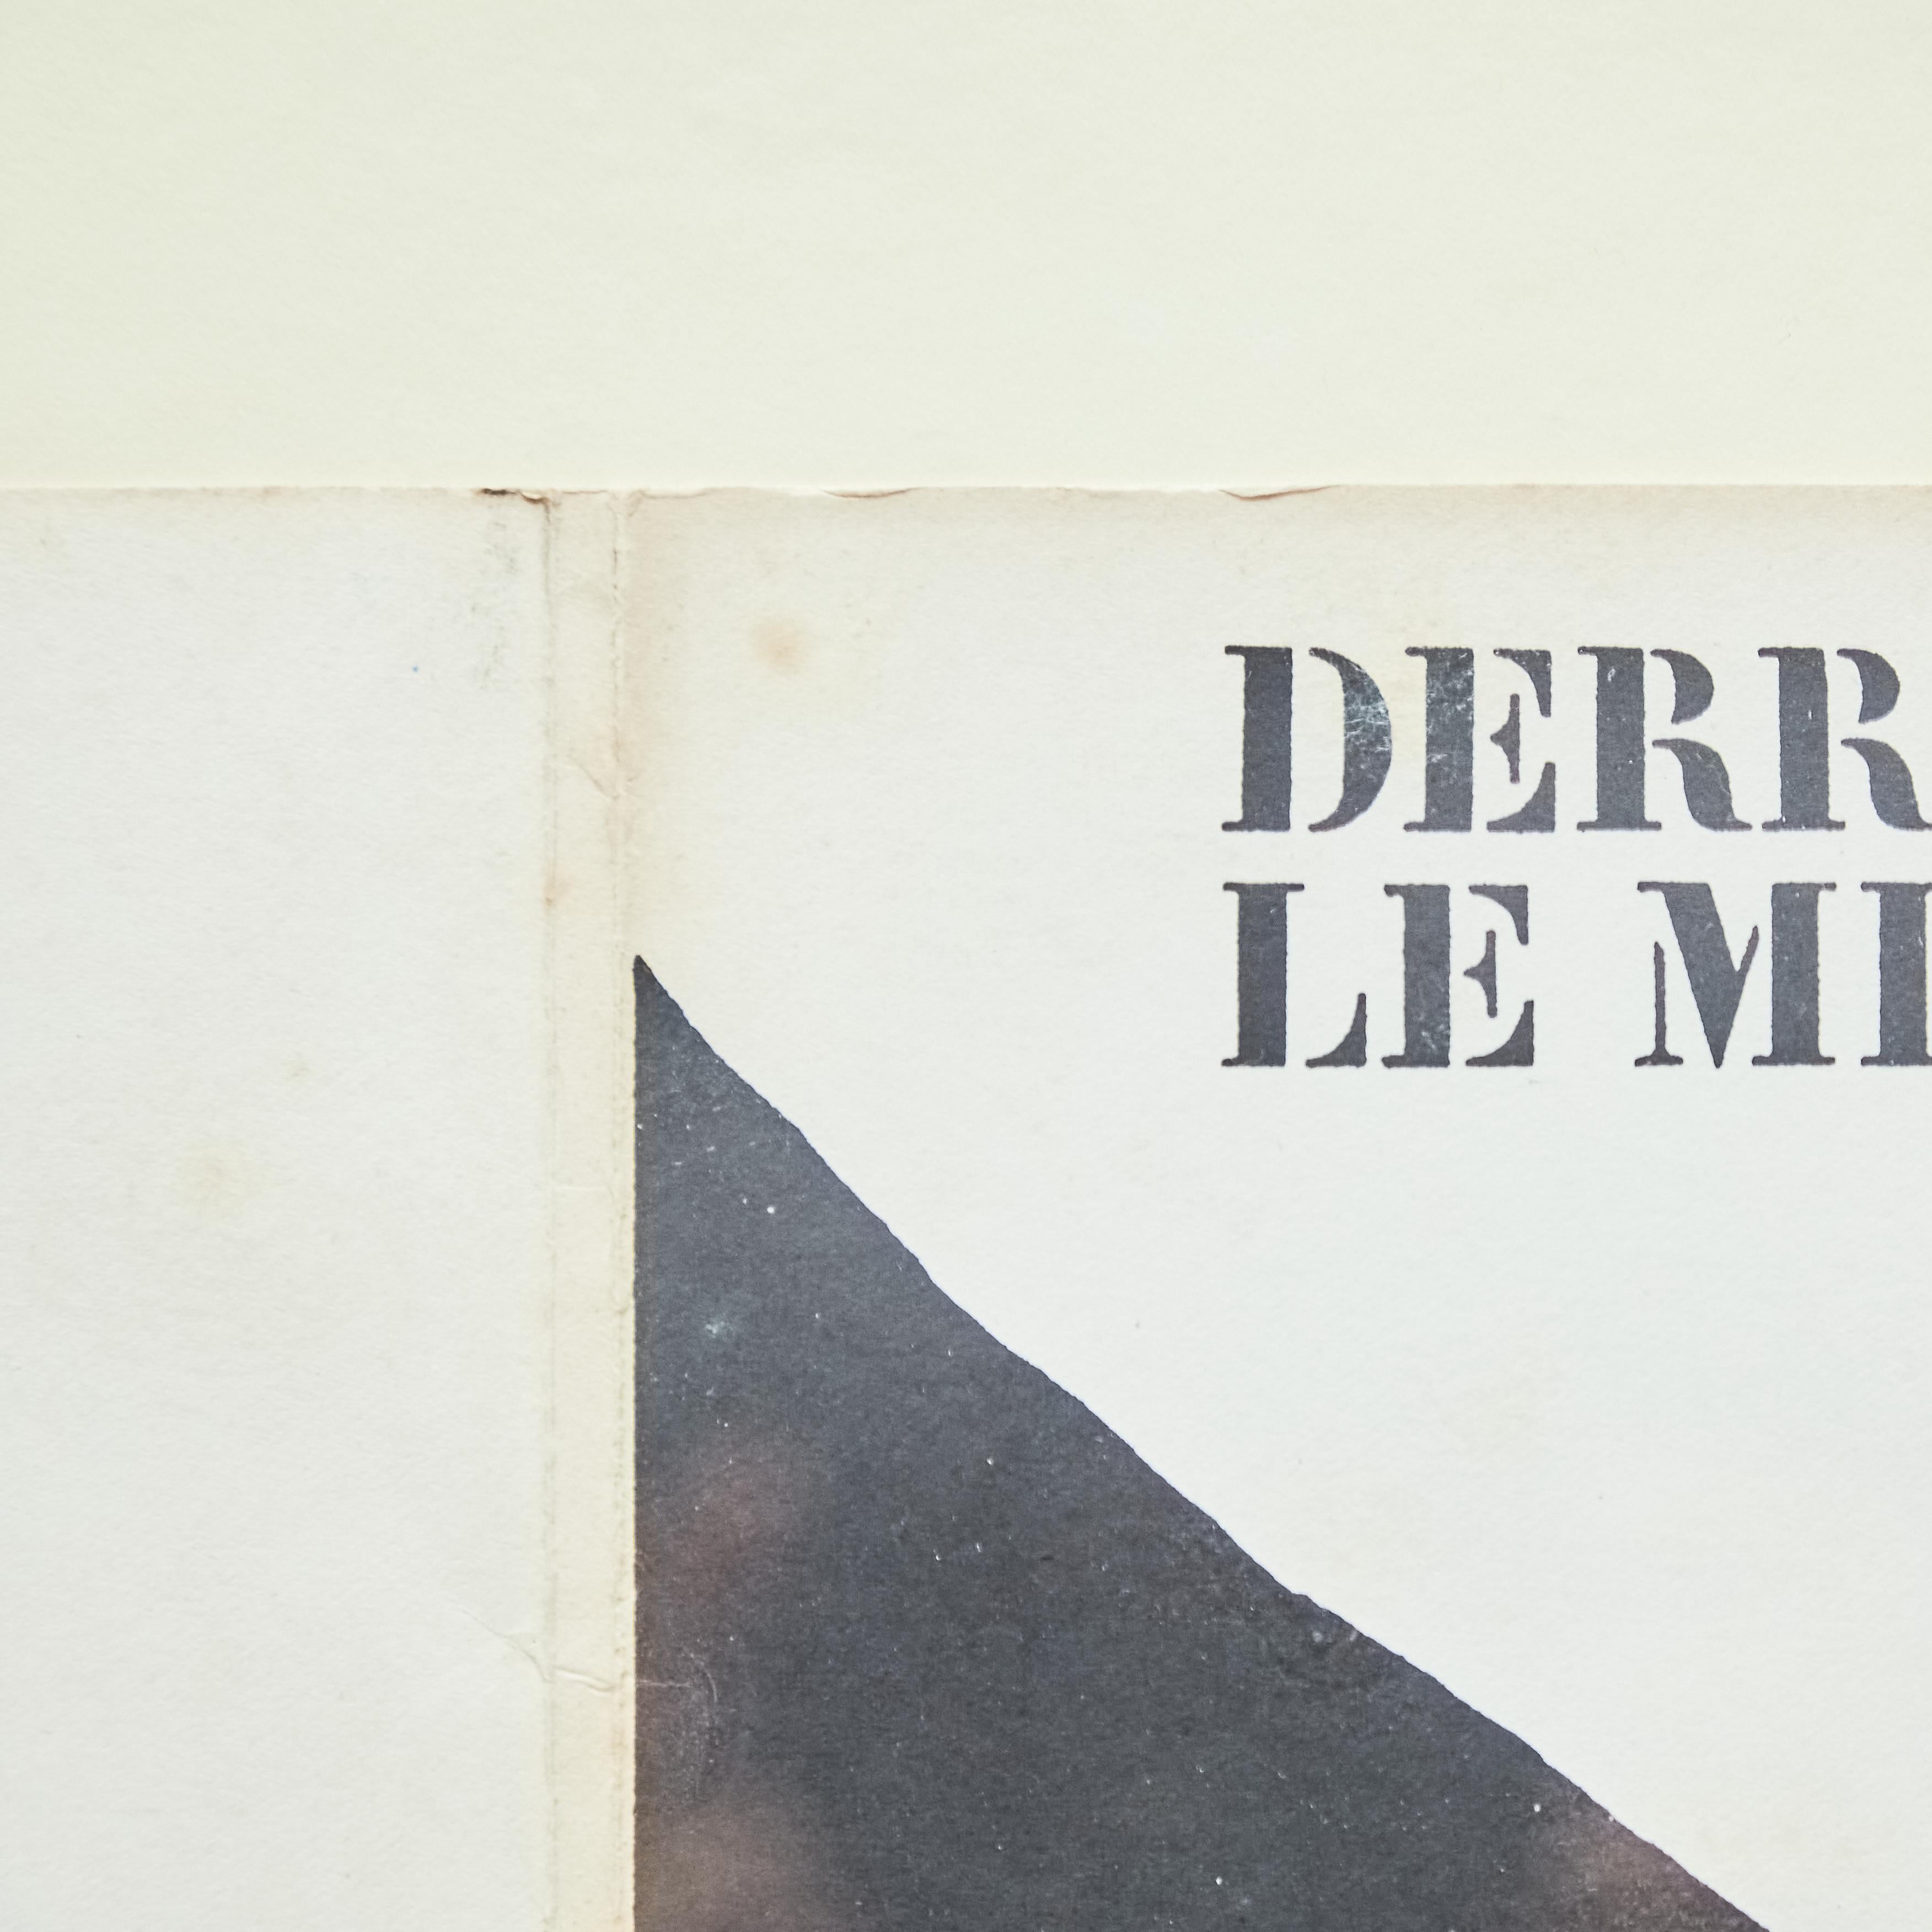 Framed Cover magazine by Alexander Calder for 'Darriere Le Miroir'.

Manufactured in France, circa 1971.

In original condition with minor wear consistent of age and use, preserving a beautiful patina.

Materials: 
Paper 

Dimensions: 
D 3